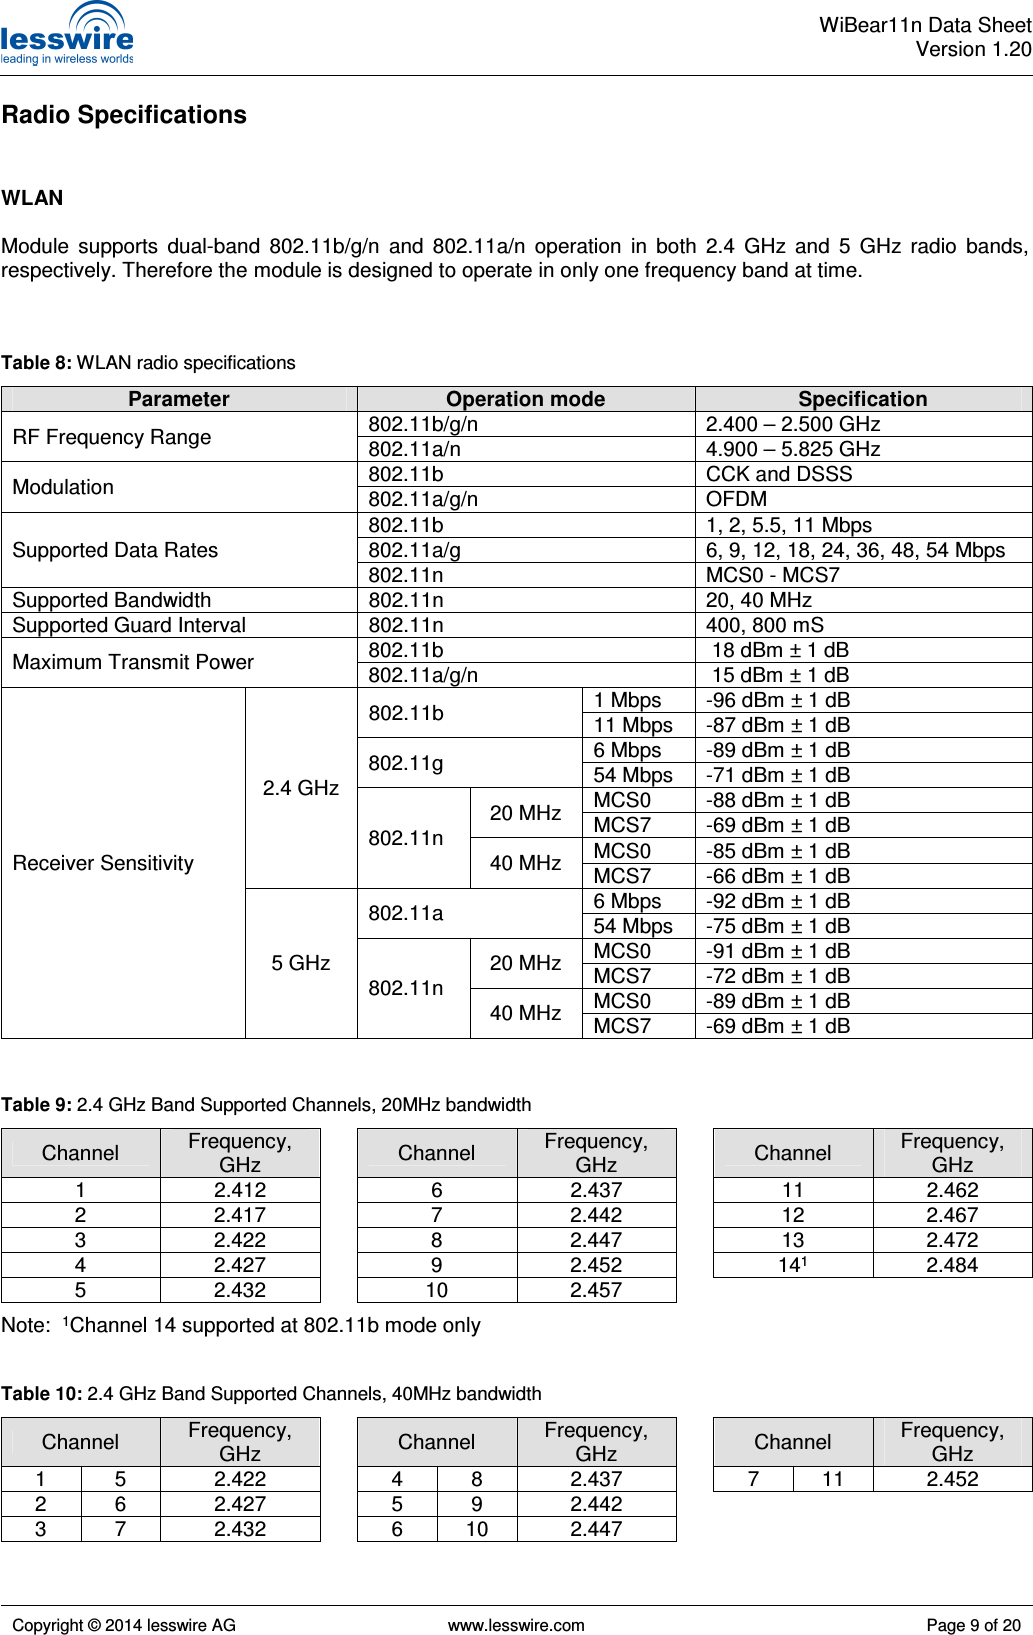  WiBear11n Data SheetVersion 1.20   Copyright © 2014 lesswire AG   www.lesswire.com  Page 9 of 20  Radio Specifications   WLAN  Module  supports  dual-band  802.11b/g/n  and  802.11a/n  operation  in  both  2.4  GHz  and  5  GHz  radio  bands, respectively. Therefore the module is designed to operate in only one frequency band at time.    Table 8: WLAN radio specifications Parameter Operation mode Specification RF Frequency Range  802.11b/g/n  2.400 – 2.500 GHz 802.11a/n  4.900 – 5.825 GHz Modulation  802.11b  CCK and DSSS 802.11a/g/n  OFDM Supported Data Rates 802.11b  1, 2, 5.5, 11 Mbps 802.11a/g  6, 9, 12, 18, 24, 36, 48, 54 Mbps 802.11n  MCS0 - MCS7 Supported Bandwidth  802.11n  20, 40 MHz Supported Guard Interval  802.11n  400, 800 mS Maximum Transmit Power  802.11b   18 dBm ± 1 dB 802.11a/g/n   15 dBm ± 1 dB Receiver Sensitivity 2.4 GHz 802.11b  1 Mbps  -96 dBm ± 1 dB 11 Mbps  -87 dBm ± 1 dB 802.11g  6 Mbps  -89 dBm ± 1 dB 54 Mbps  -71 dBm ± 1 dB 802.11n 20 MHz  MCS0  -88 dBm ± 1 dB MCS7  -69 dBm ± 1 dB 40 MHz  MCS0  -85 dBm ± 1 dB MCS7  -66 dBm ± 1 dB 5 GHz 802.11a  6 Mbps  -92 dBm ± 1 dB 54 Mbps  -75 dBm ± 1 dB 802.11n 20 MHz  MCS0  -91 dBm ± 1 dB MCS7  -72 dBm ± 1 dB 40 MHz  MCS0  -89 dBm ± 1 dB MCS7  -69 dBm ± 1 dB    Table 9: 2.4 GHz Band Supported Channels, 20MHz bandwidth Channel  Frequency, GHz    Channel  Frequency, GHz    Channel  Frequency, GHz    1  2.412    6  2.437    11  2.462 2  2.417    7  2.442    12  2.467 3  2.422    8  2.447    13  2.472 4  2.427    9  2.452    141  2.484 5  2.432    10  2.457        Note:  1Channel 14 supported at 802.11b mode only   Table 10: 2.4 GHz Band Supported Channels, 40MHz bandwidth Channel  Frequency, GHz    Channel  Frequency, GHz    Channel  Frequency, GHz 1  5  2.422    4  8  2.437    7  11  2.452 2  6  2.427    5  9  2.442         3  7  2.432    6  10  2.447          